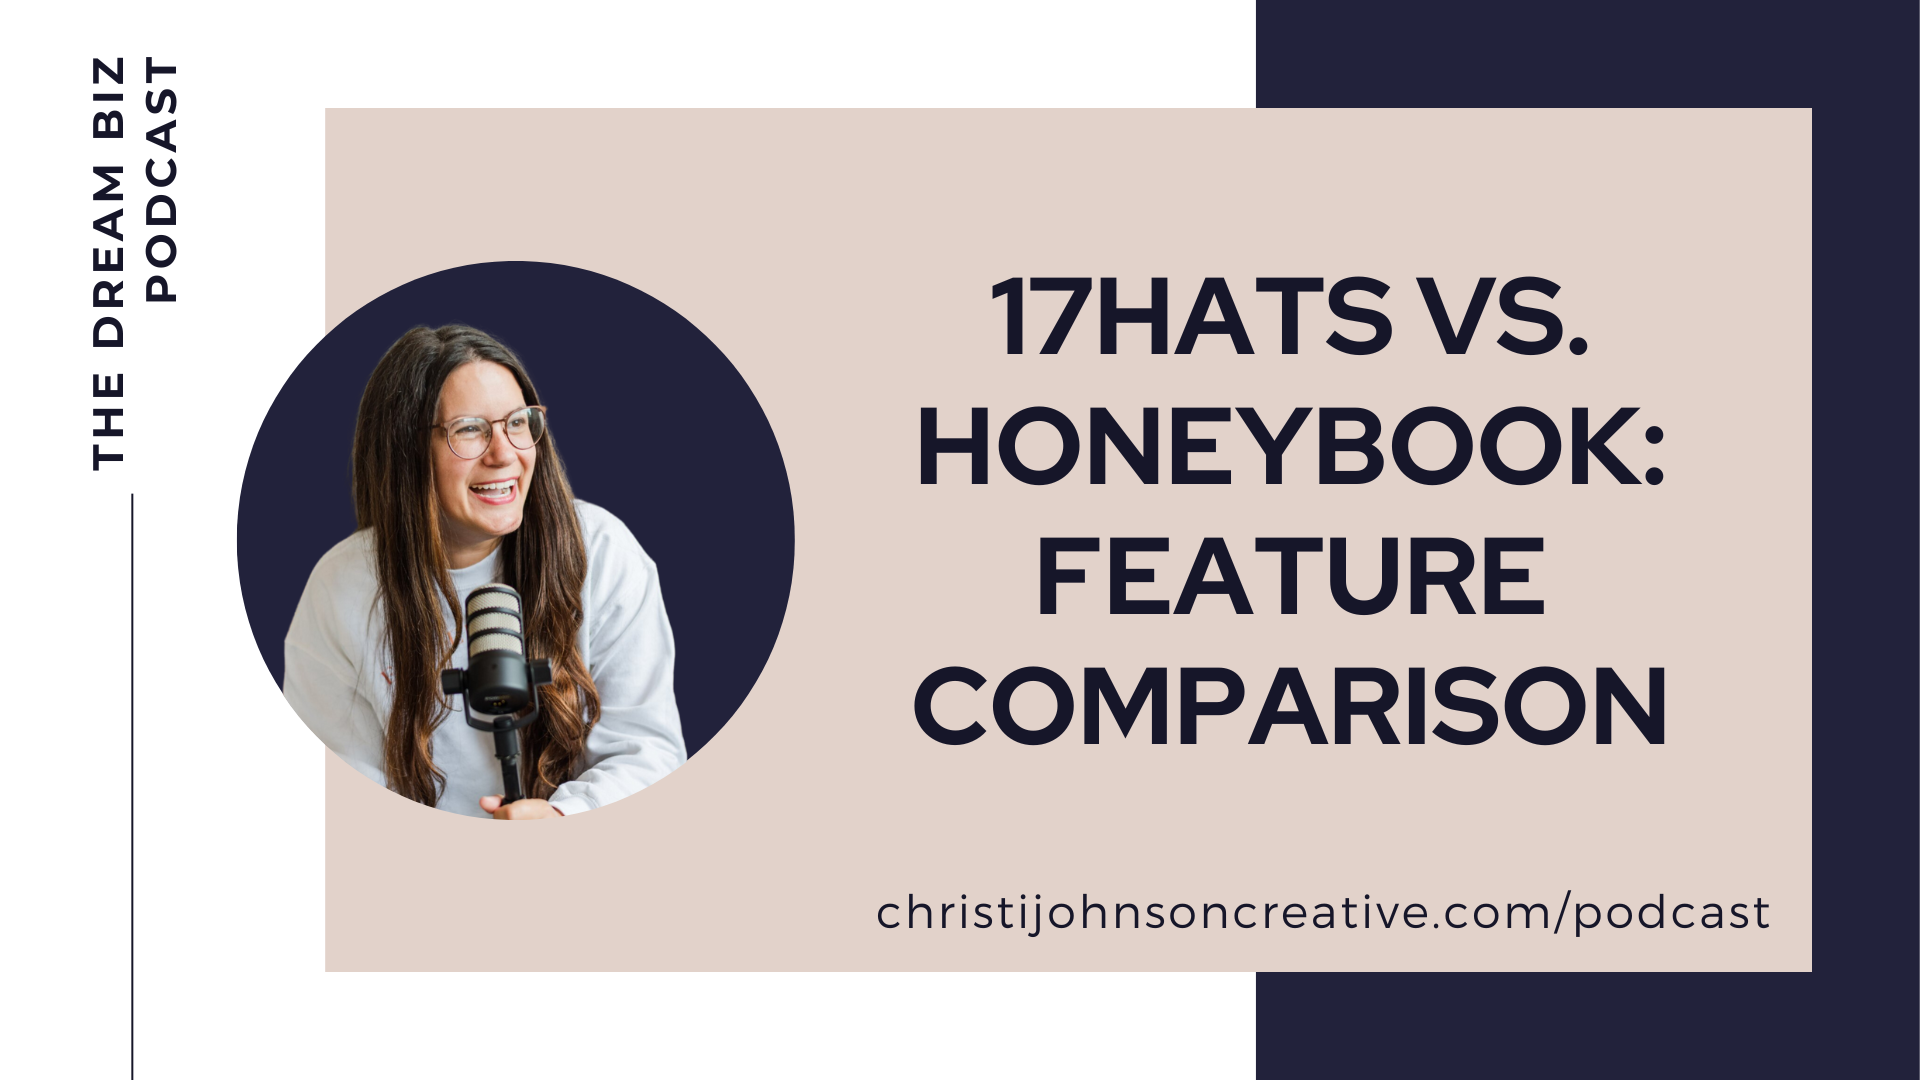 17Hats vs honeybook feature comparison is written in purple text on a tan background